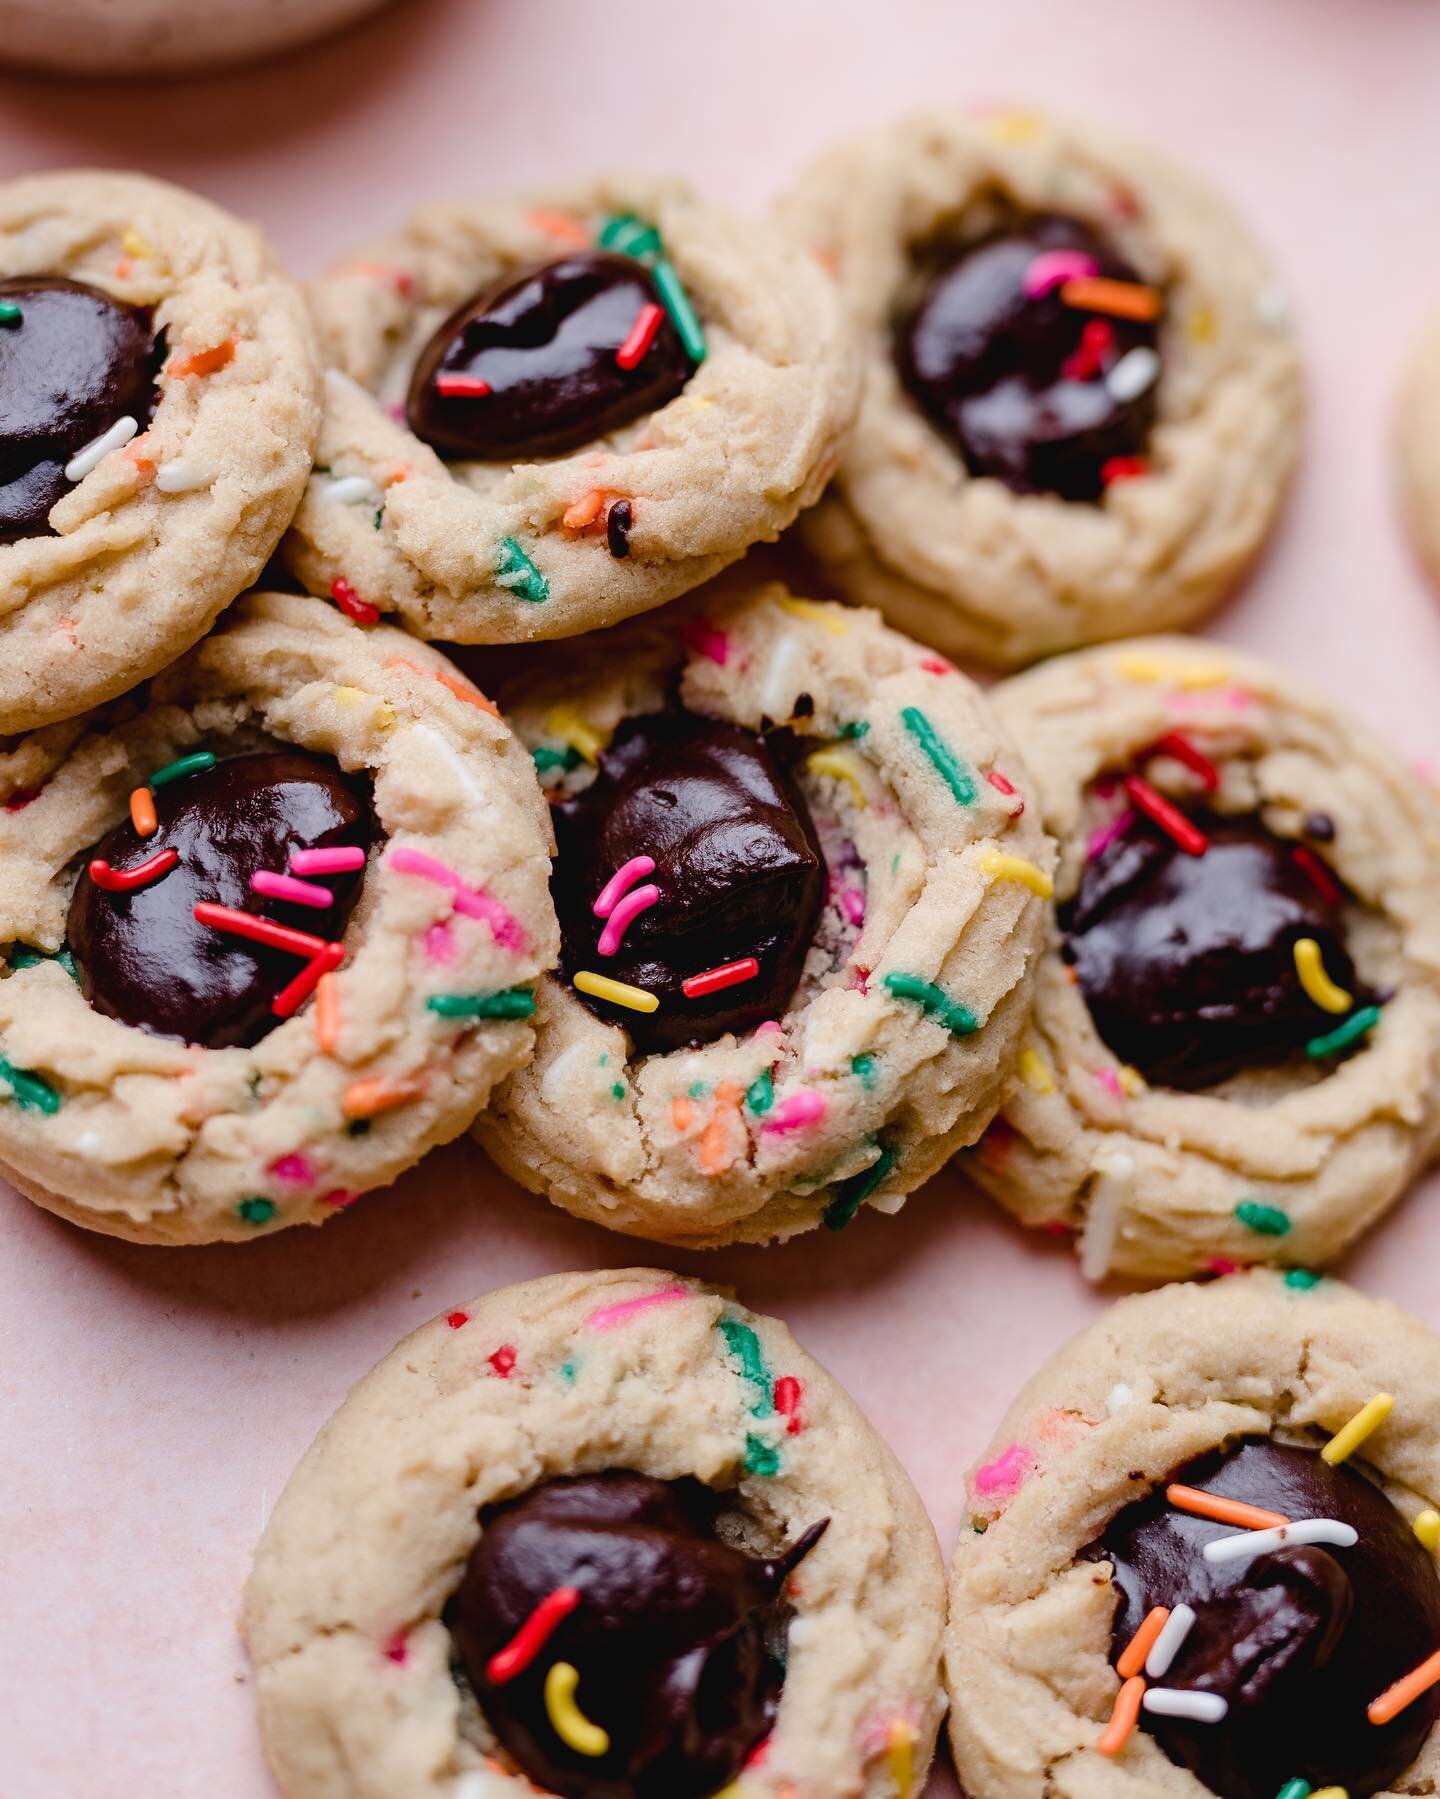 I decided to fill my Thumbprint Sprinkle Cookies with chocolate ganache&hellip;it was an excellent idea. It reminded me of something nostalgic that I would eat growing up, except they were homemade and better. Thinking I may make a separate blog post